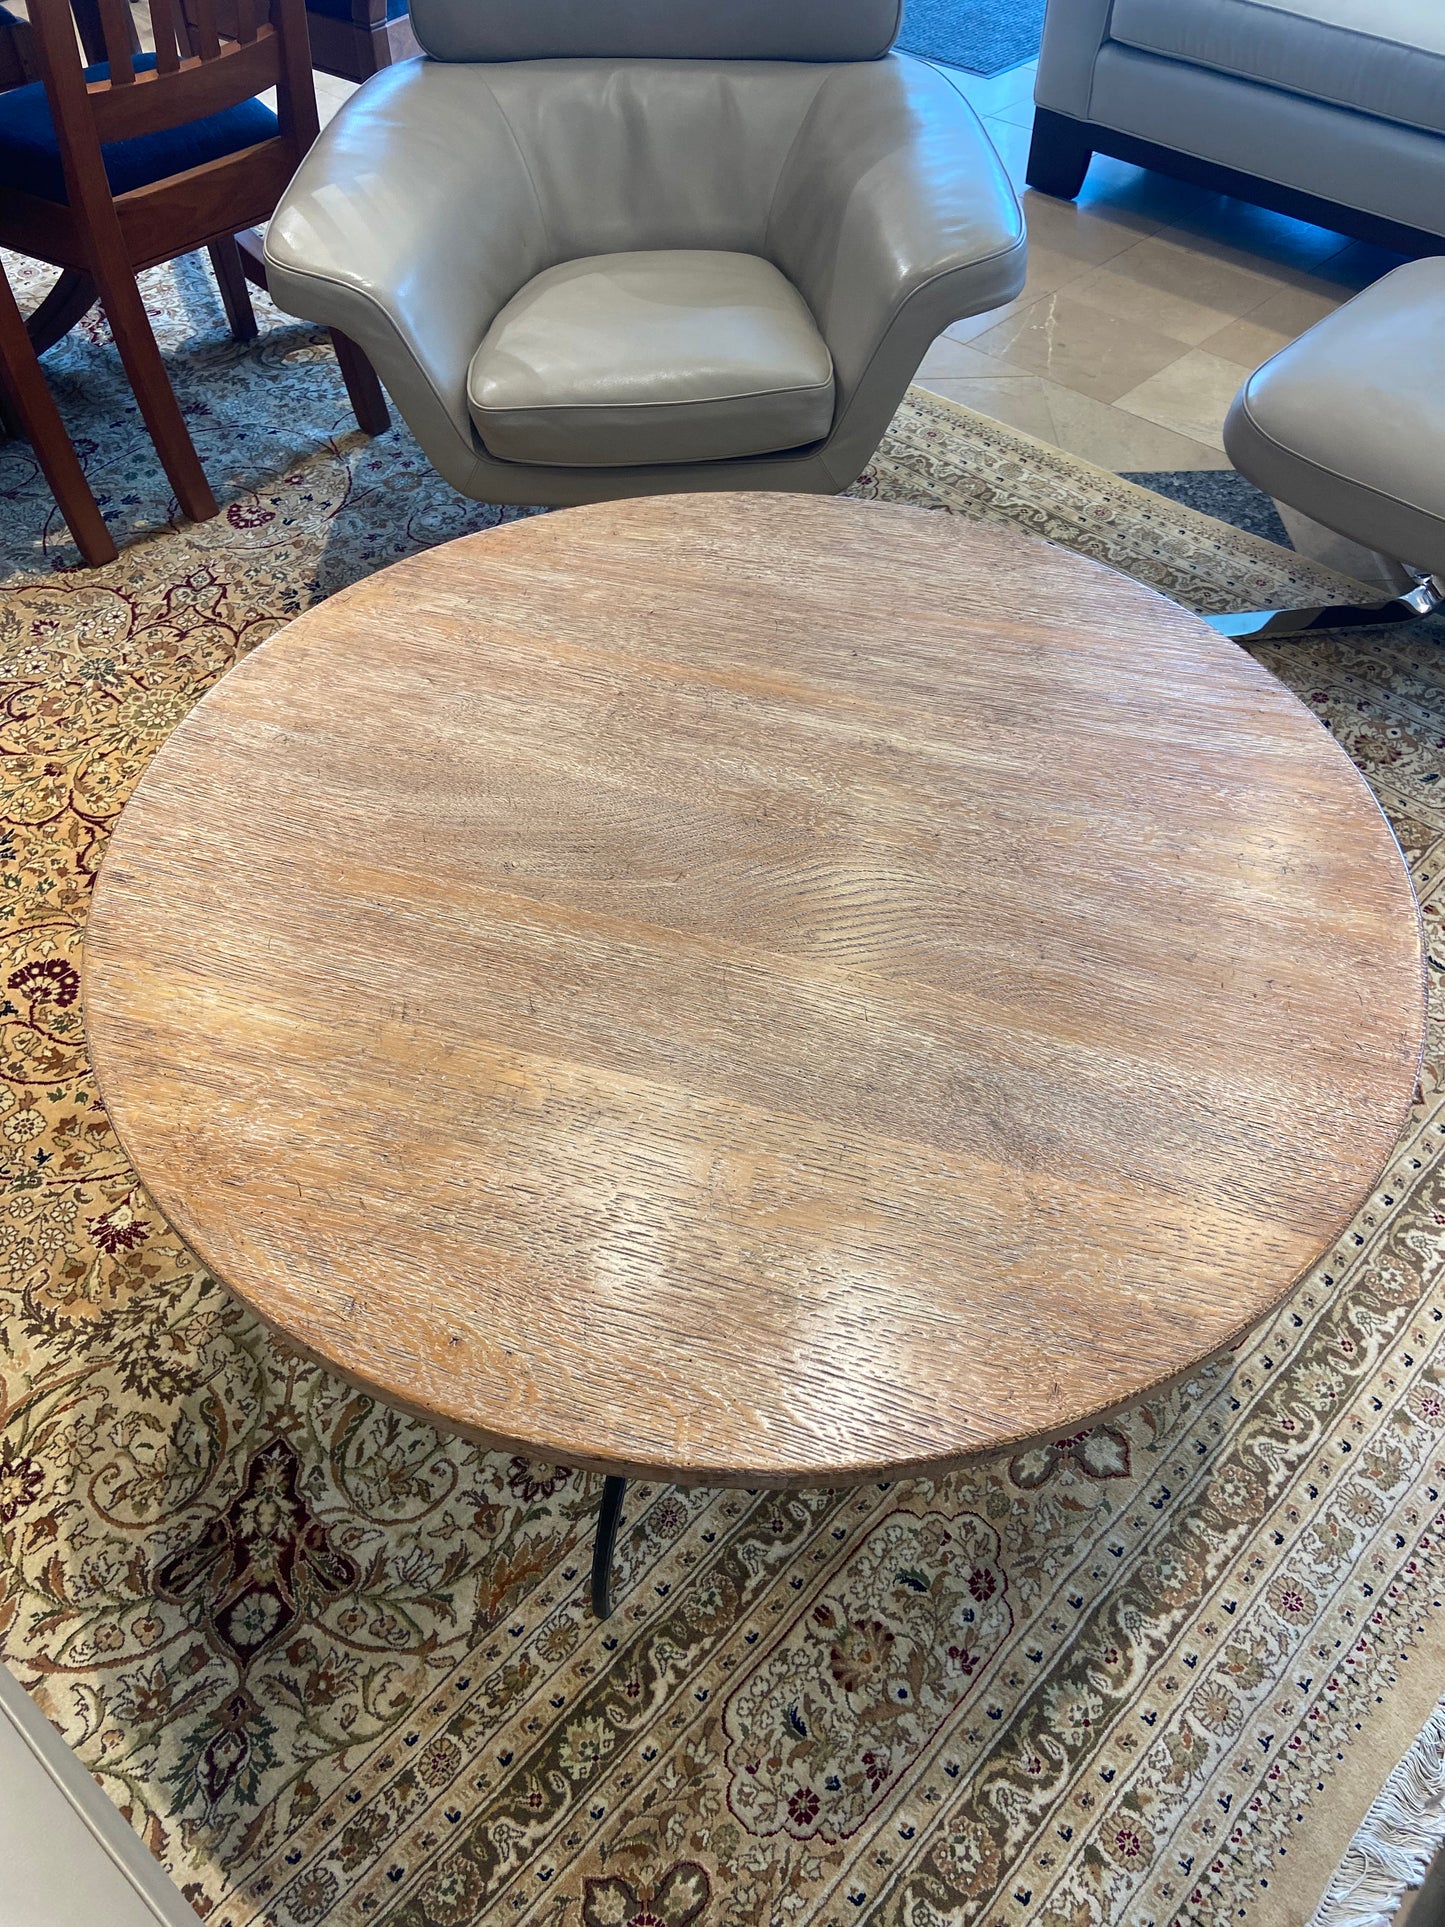 Wright Table Company Round Coffee Table